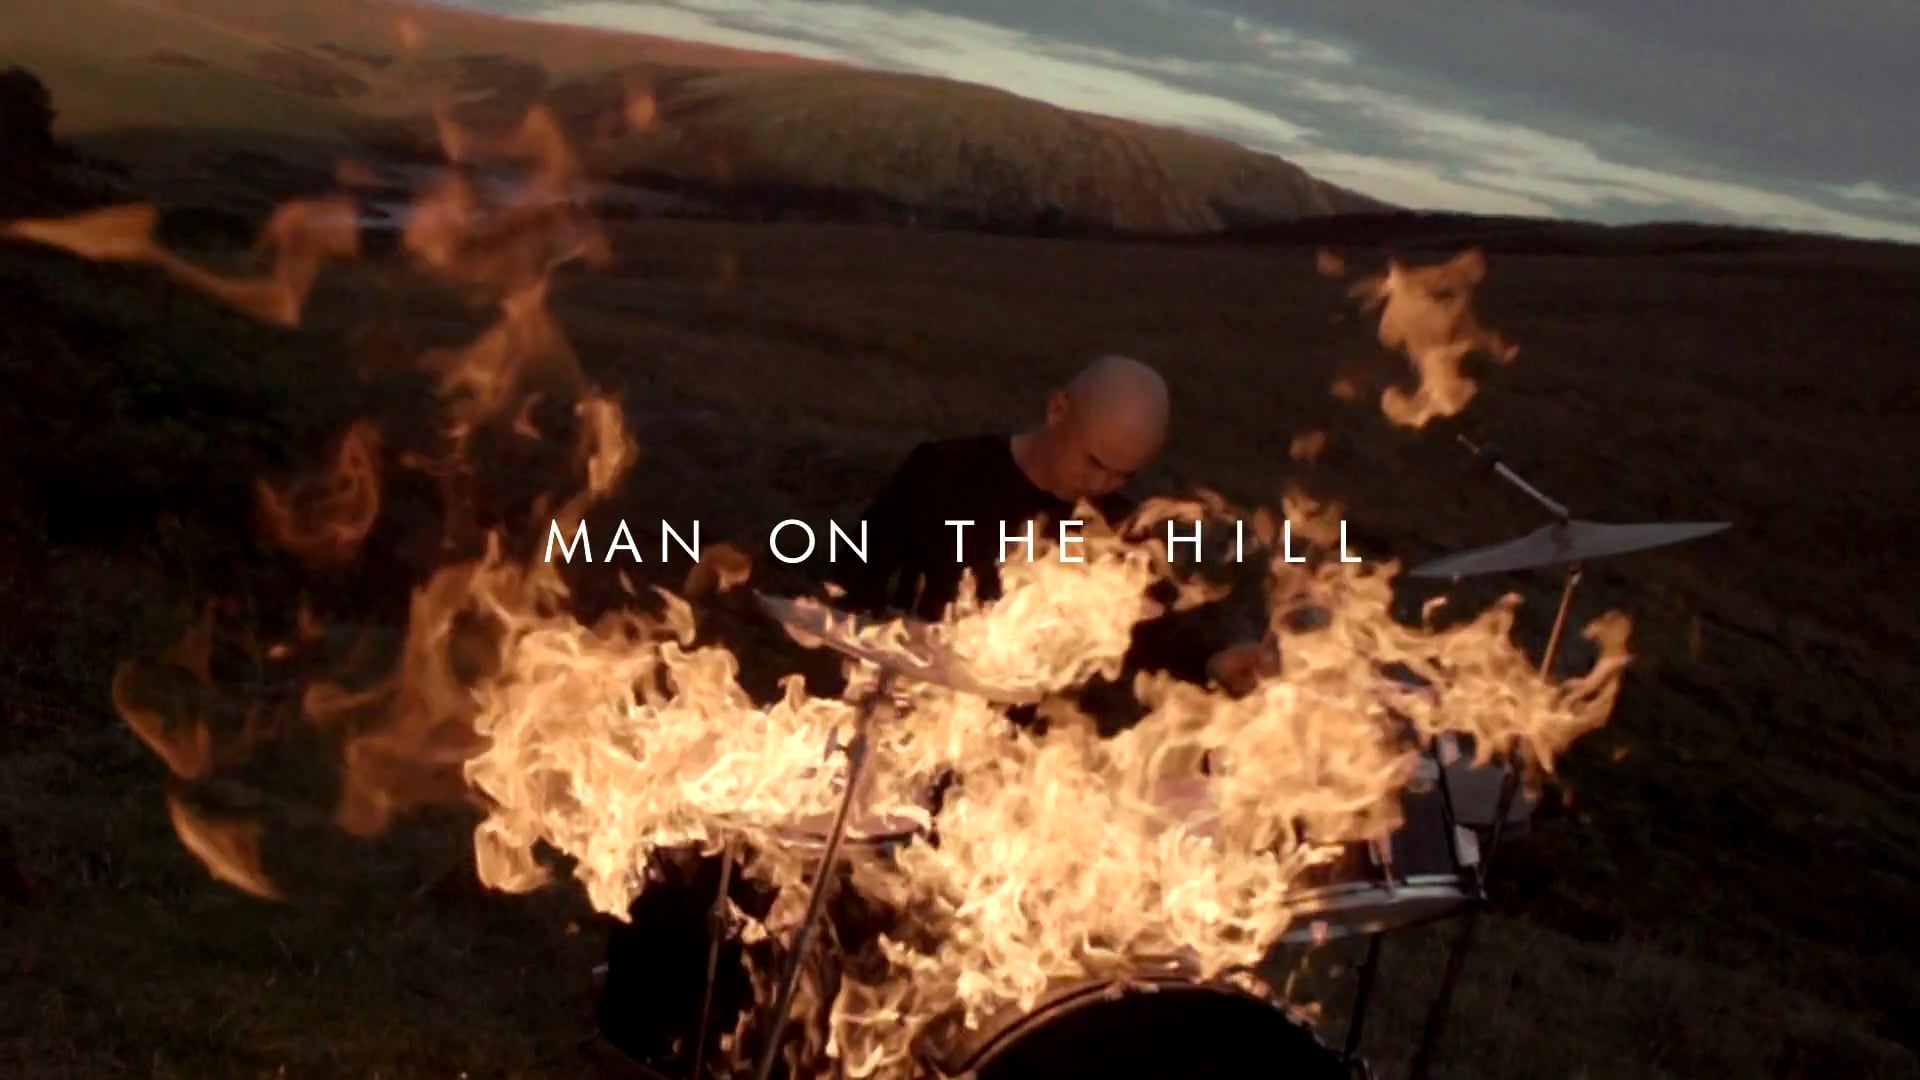 Man on the hill (2016)